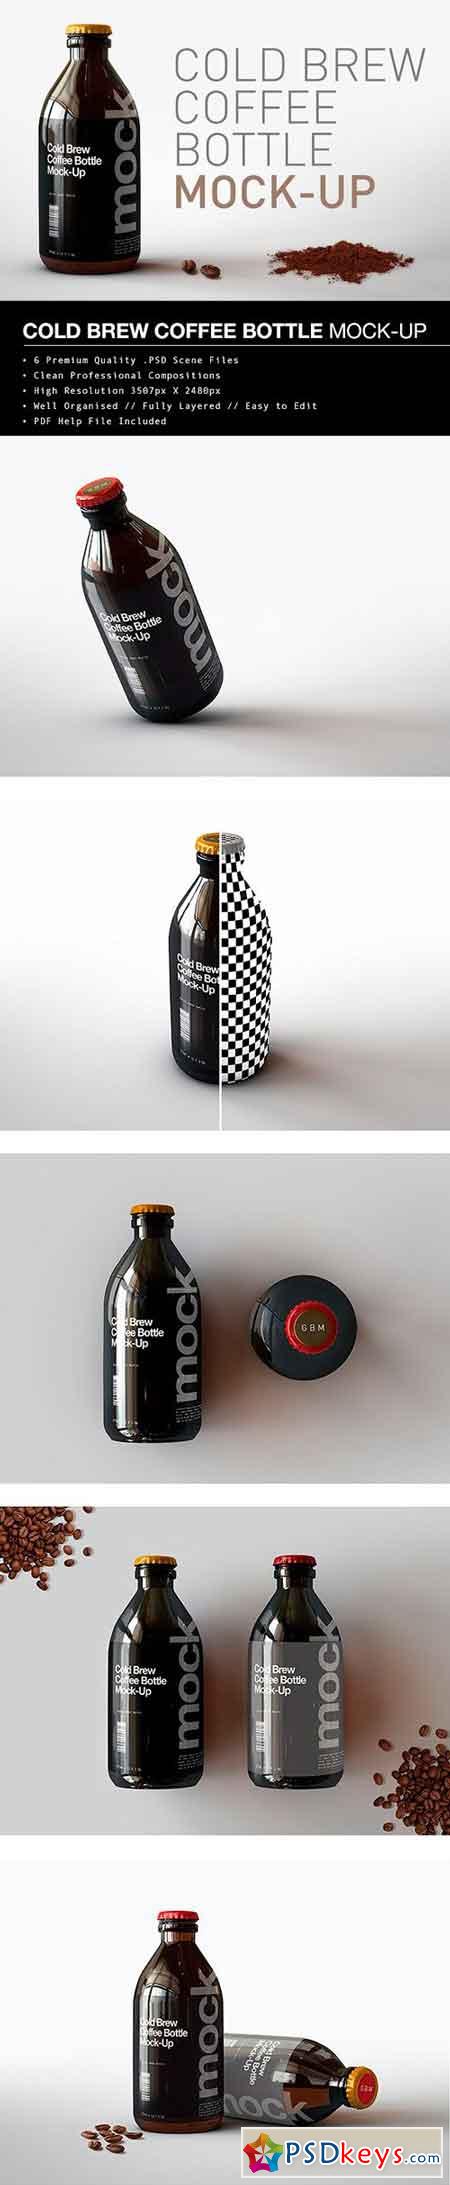 Download Cold Brew Coffee Bottle Mock-Up 1695956 » Free Download Photoshop Vector Stock image Via Torrent ...